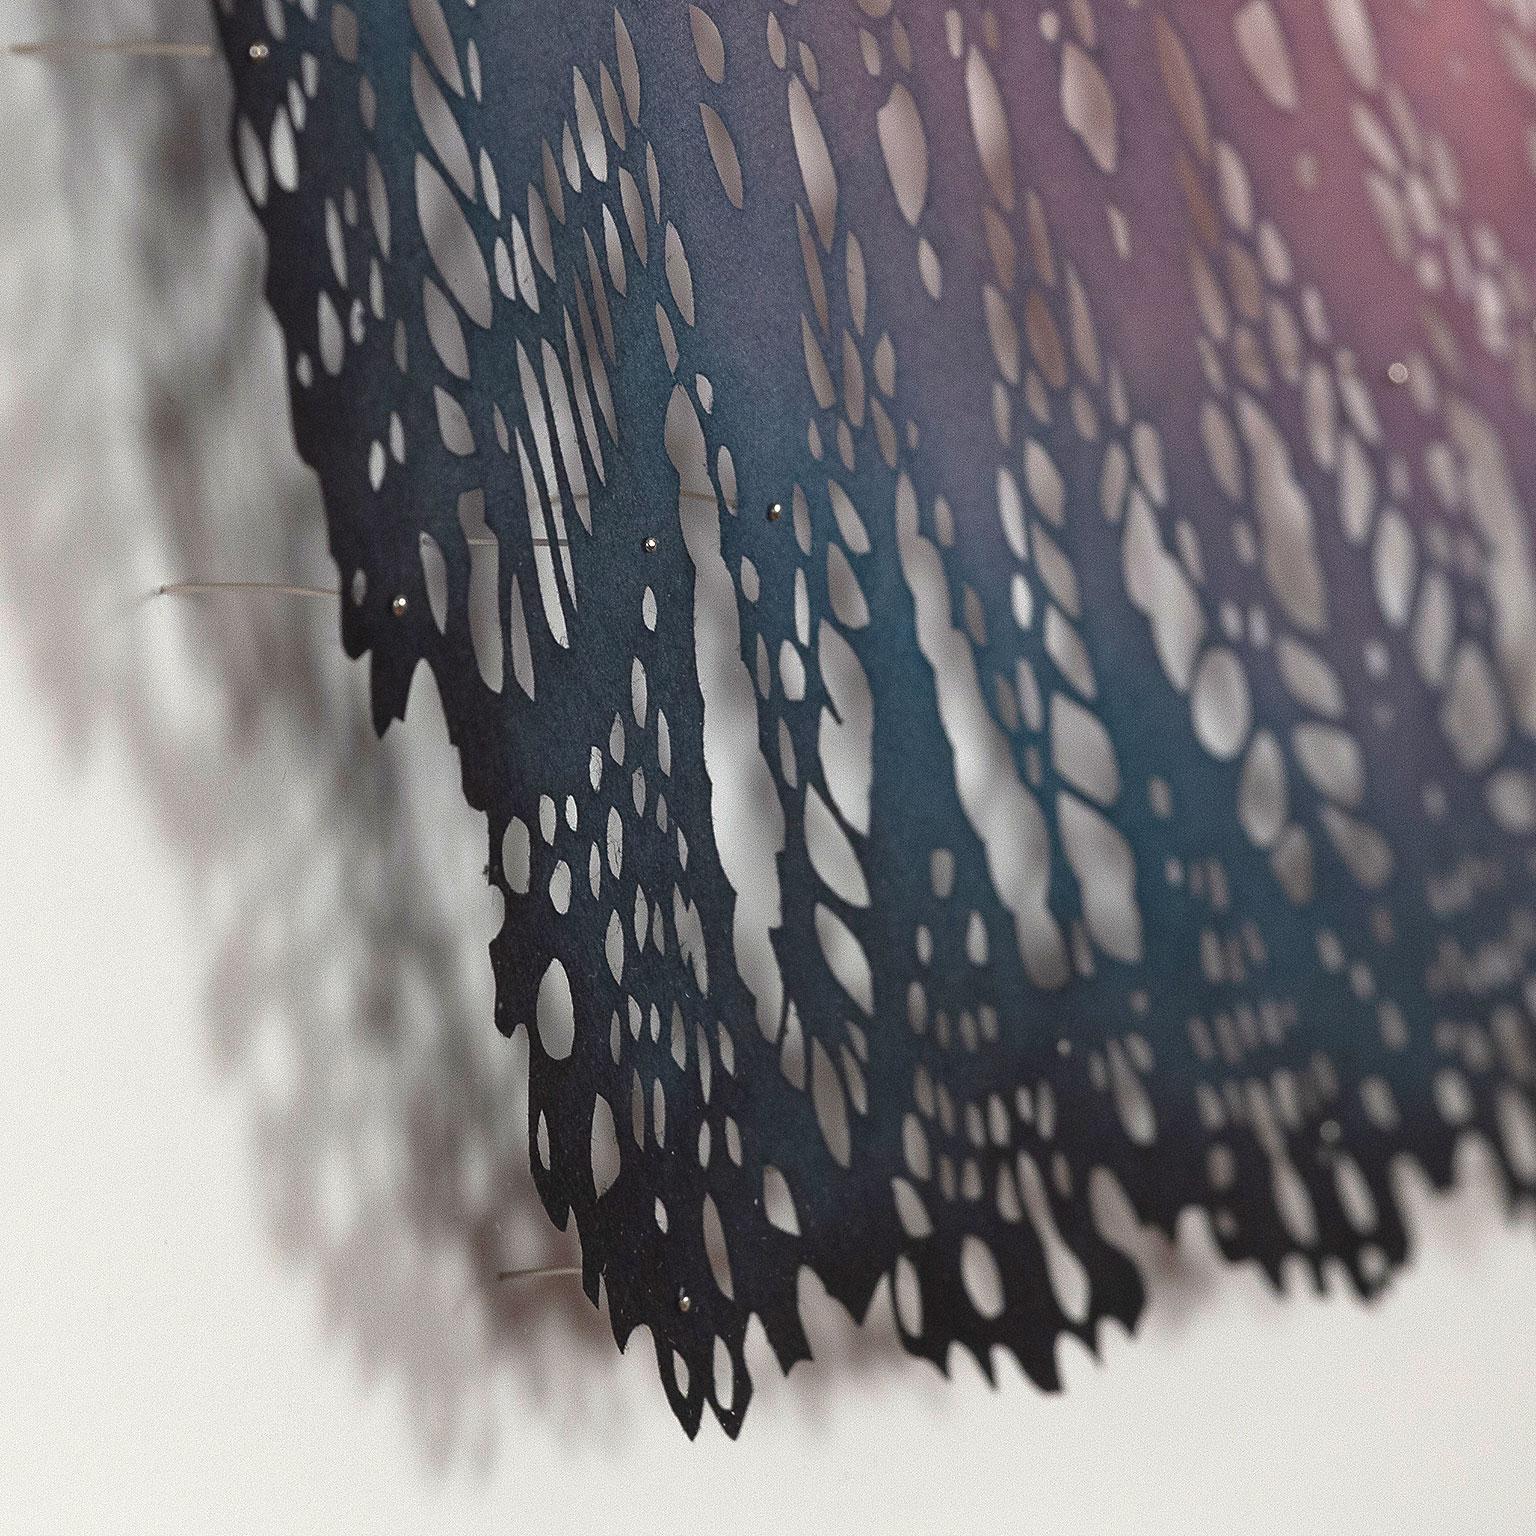 Lizz Aston's practice is informed by the history and production of textiles and decorative arts.

Like the best of Aston's work she begins by embracing an anonymous textile pattern, such as a hand-made lace doily, and then manipulates it digitally